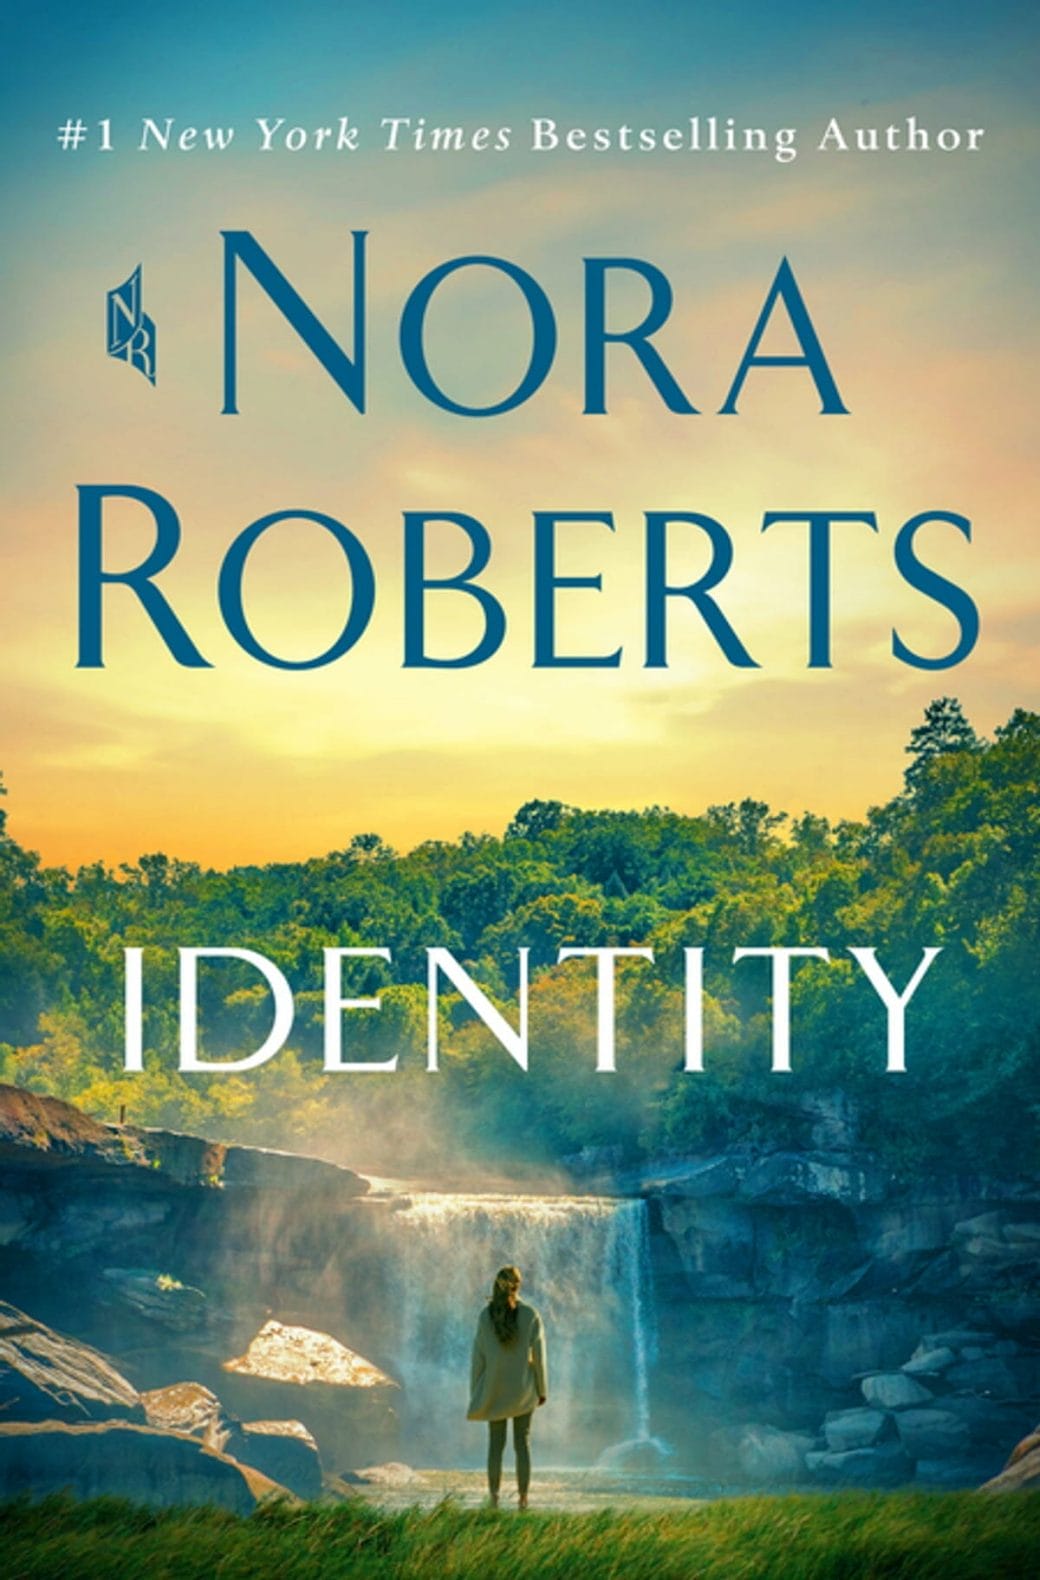 Nora Roberts New Book Inheritance Out Now!